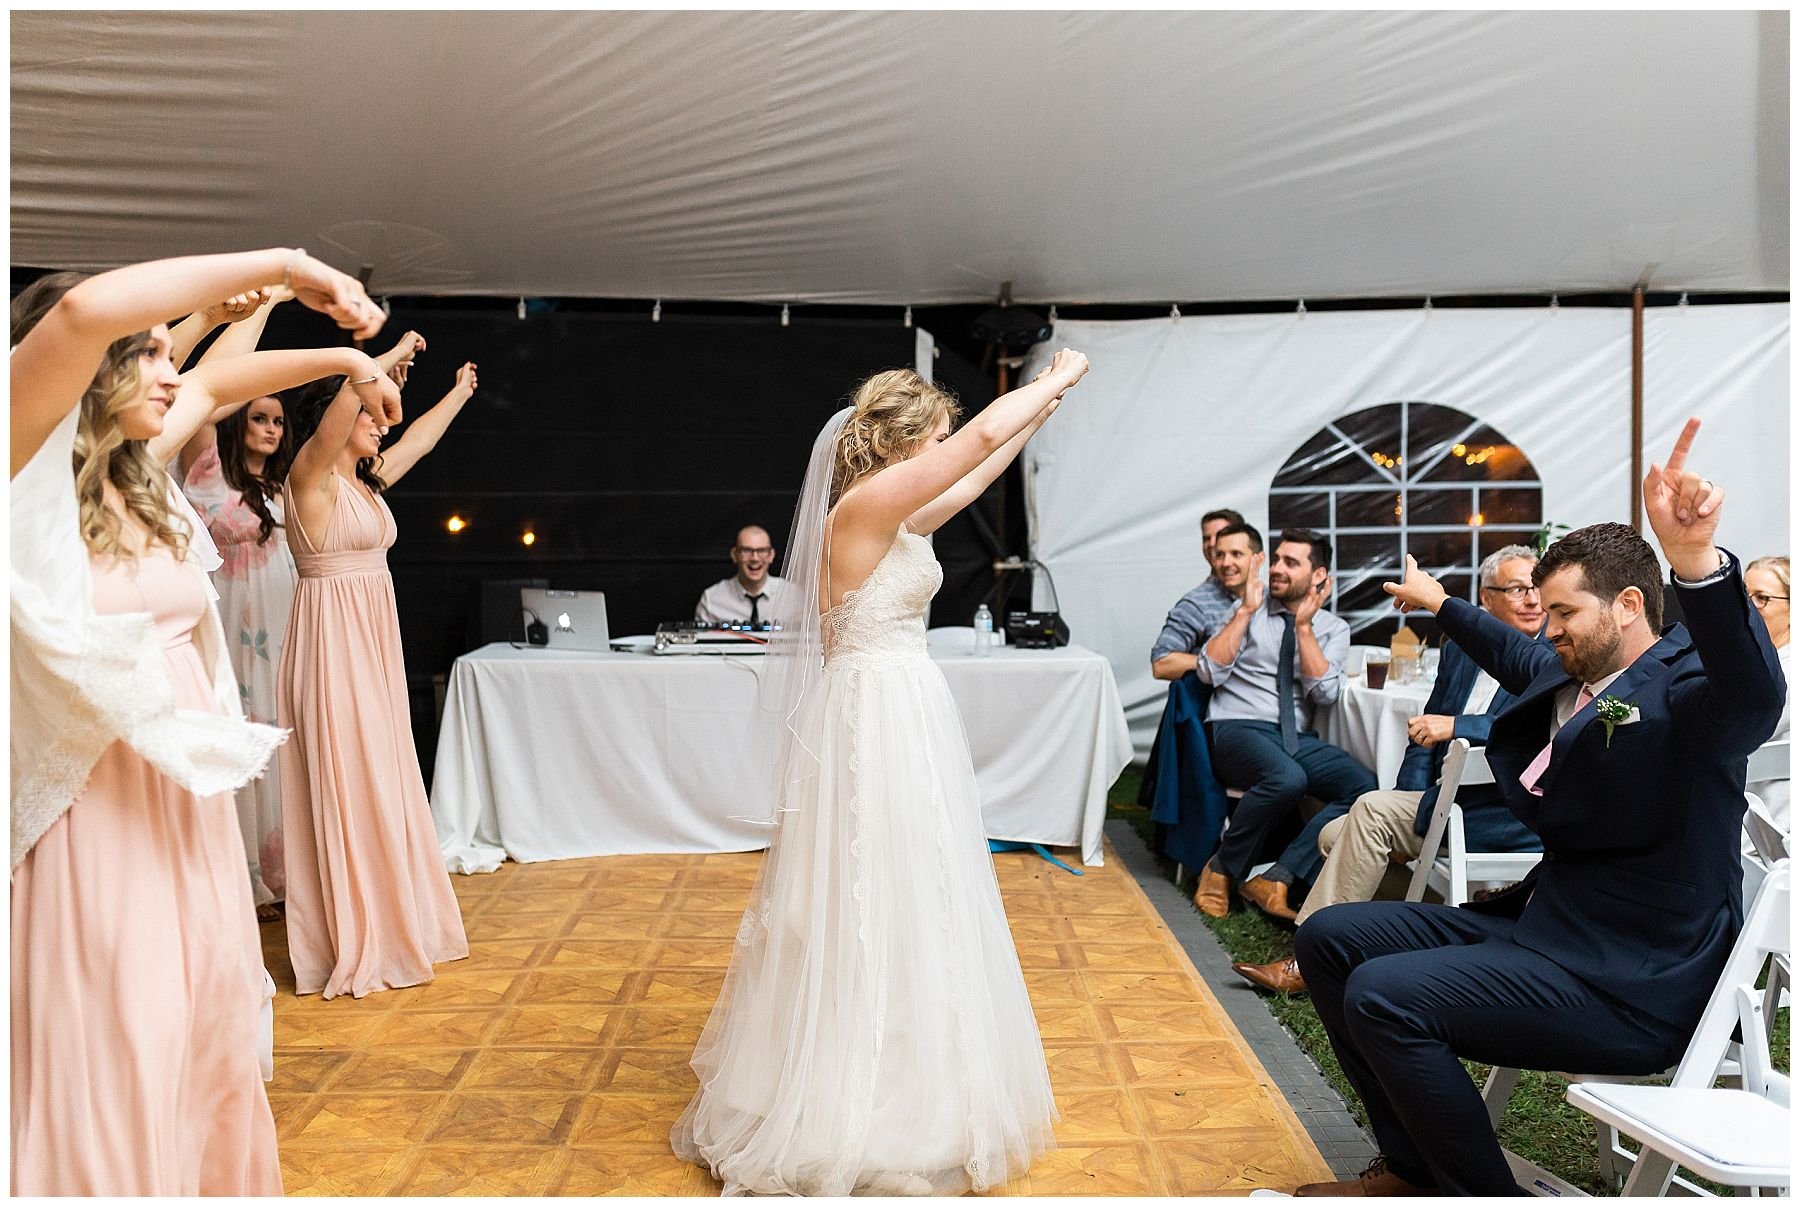 Bride performs a dance in front of groom